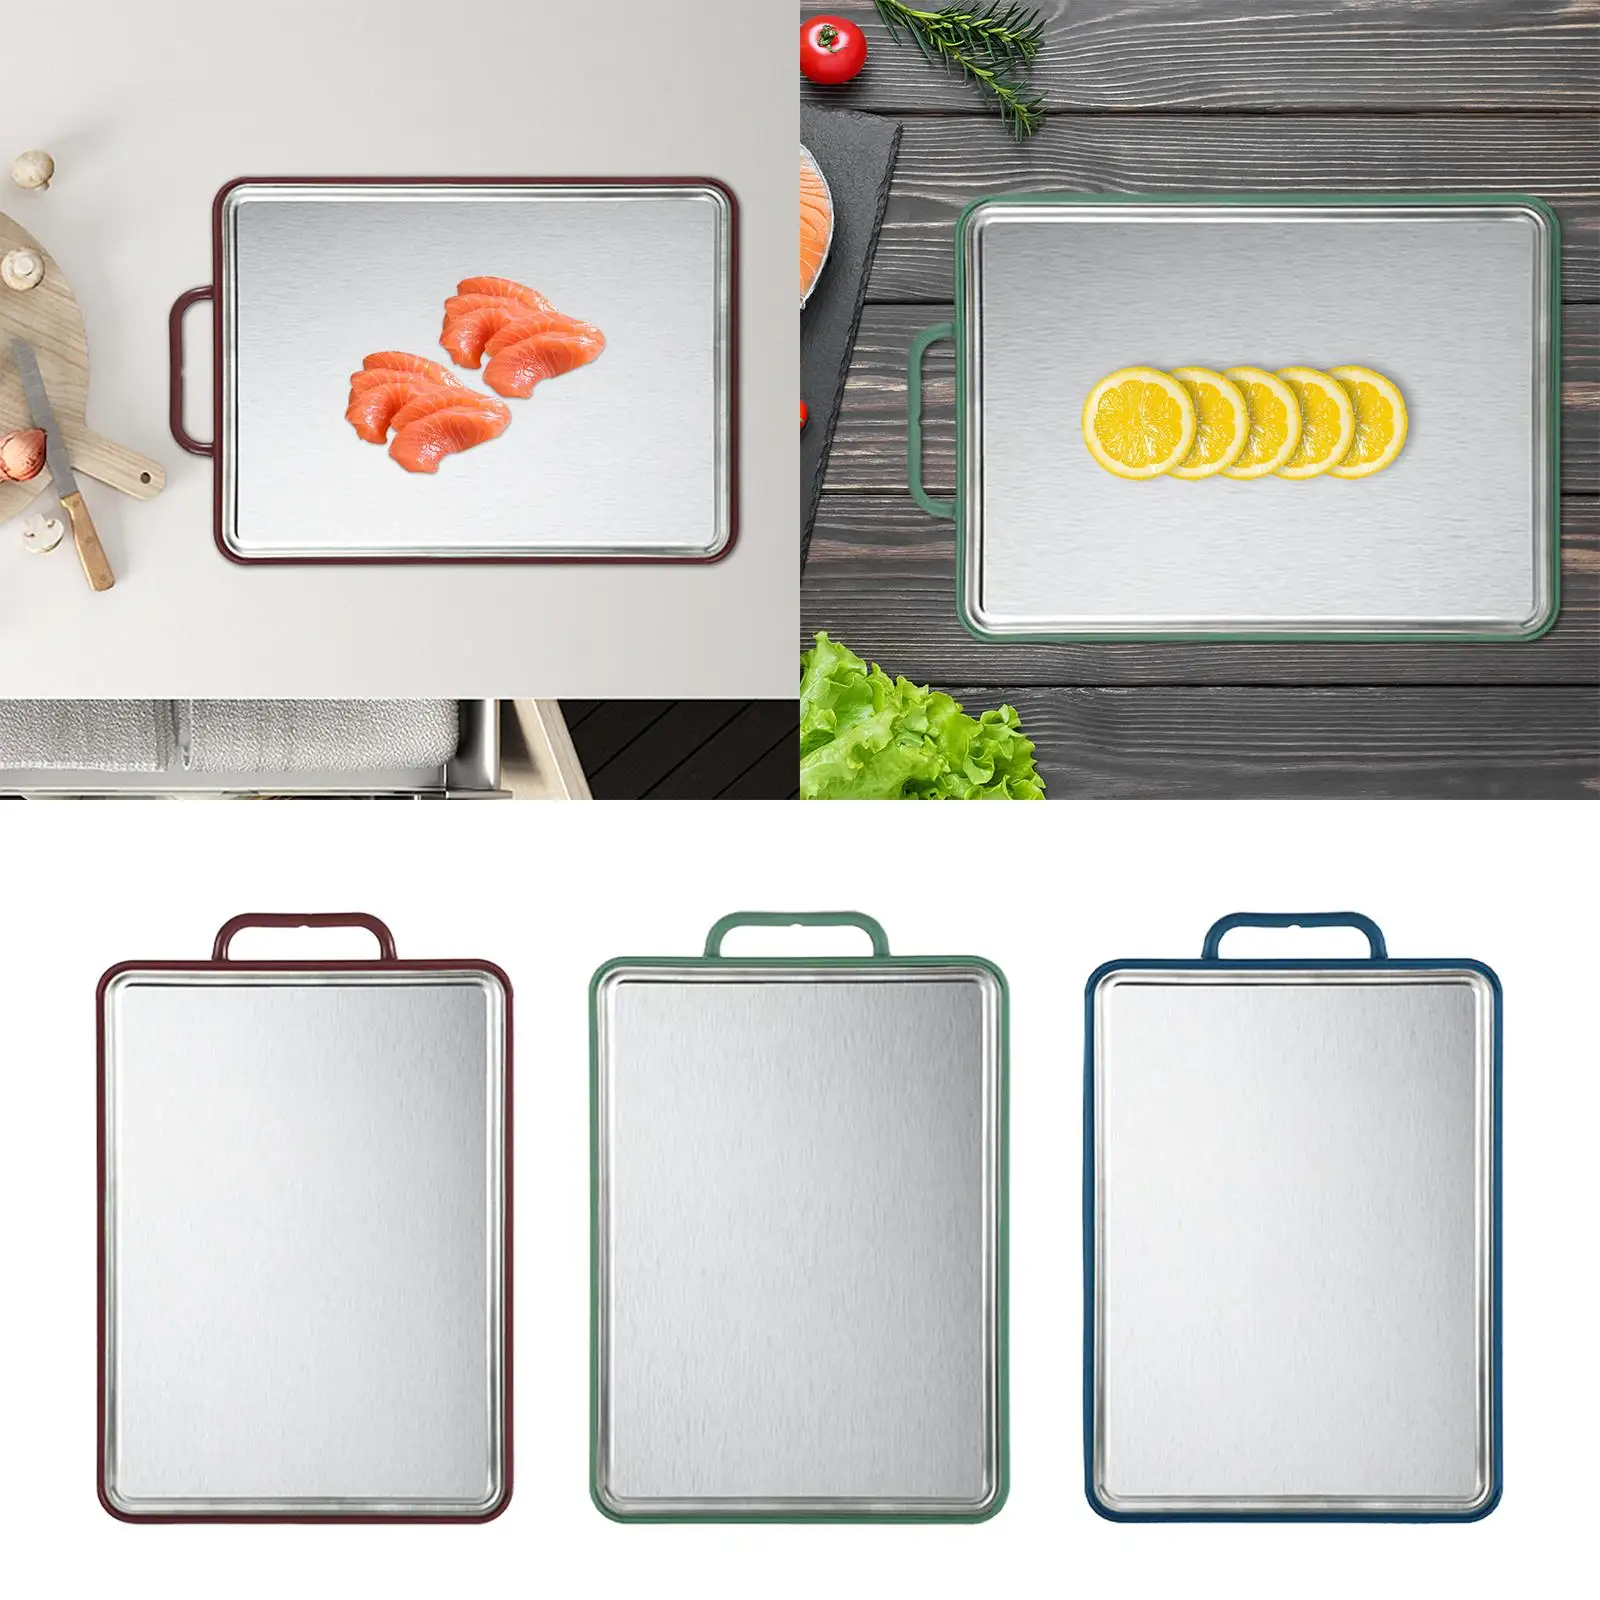 Double Sided Cutting Board Chopping Board Convenient Cleaning Food Grade Material Multifunctional 40x27cm Kitchen Gadget Durable